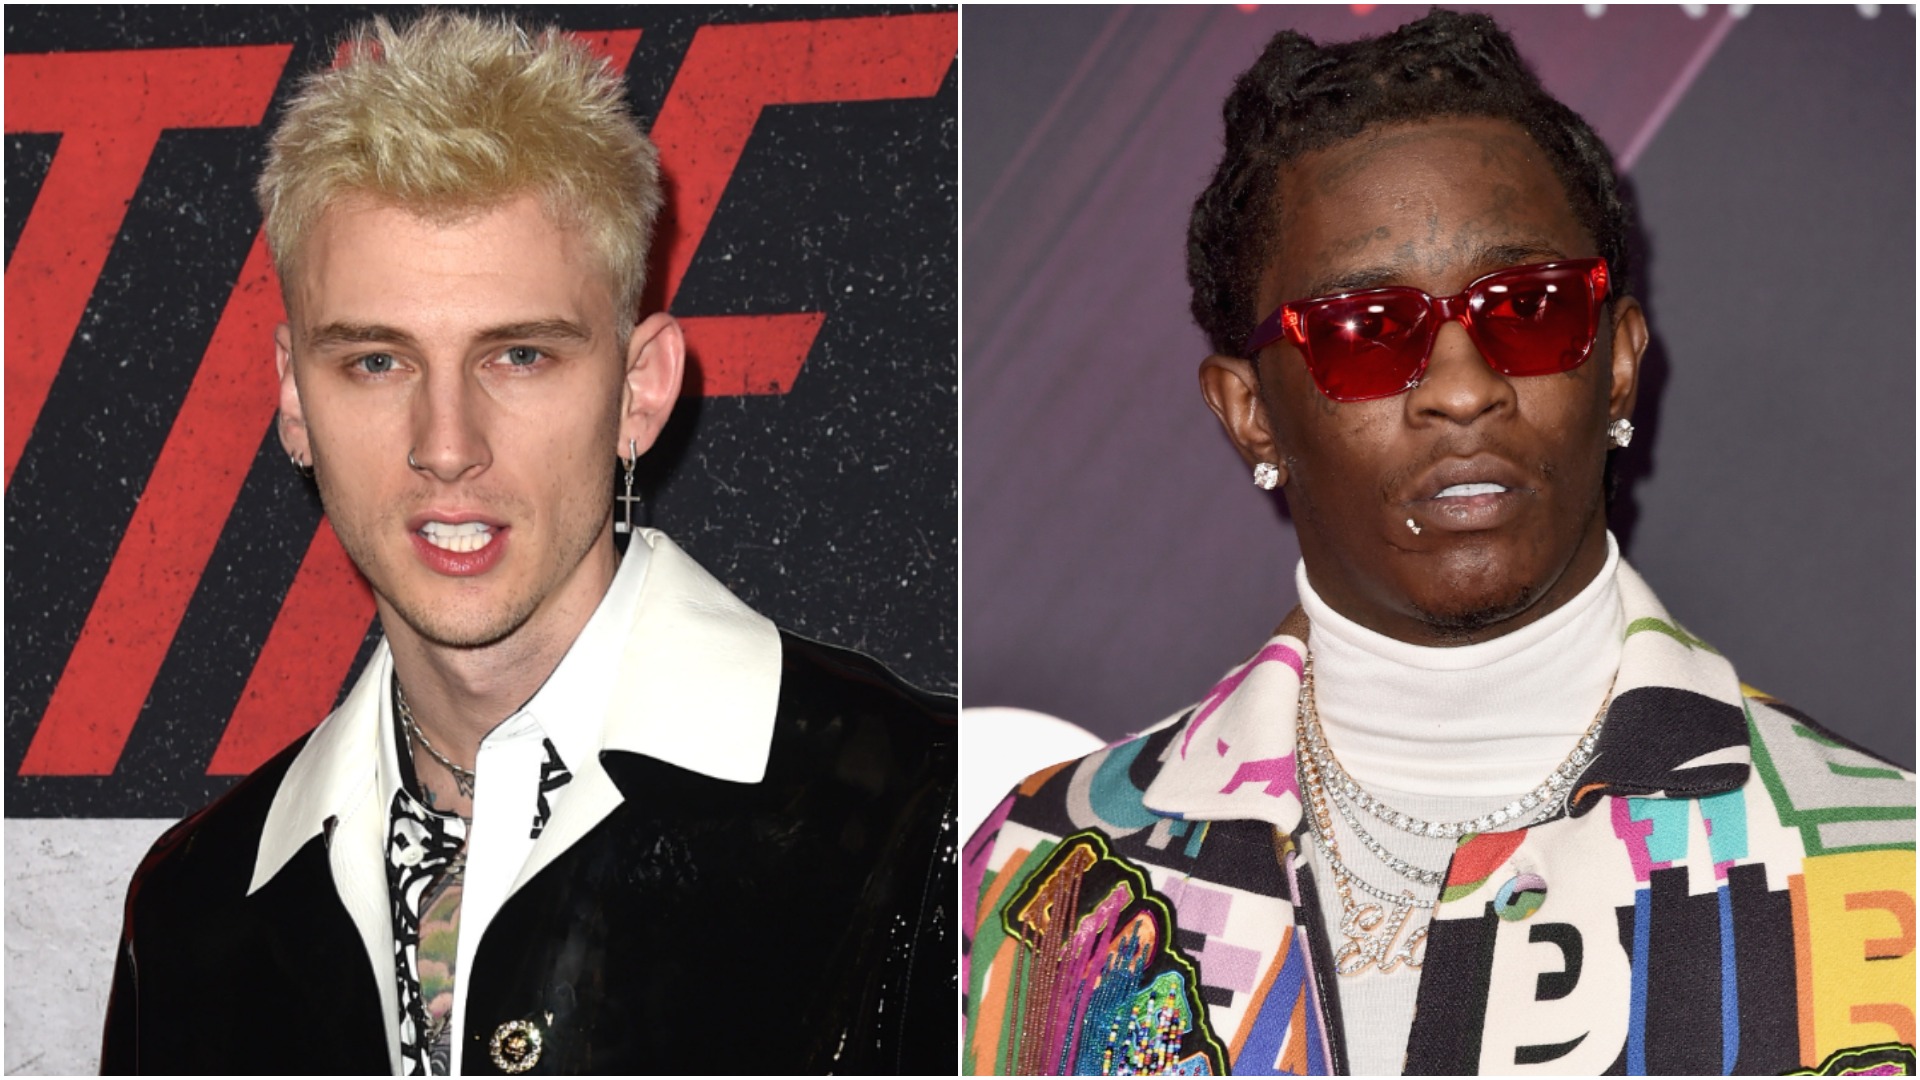 Justin Bieber Big Tour First Night: Young Thug Is Slightly Lit While MGK Is All The Way Turnt